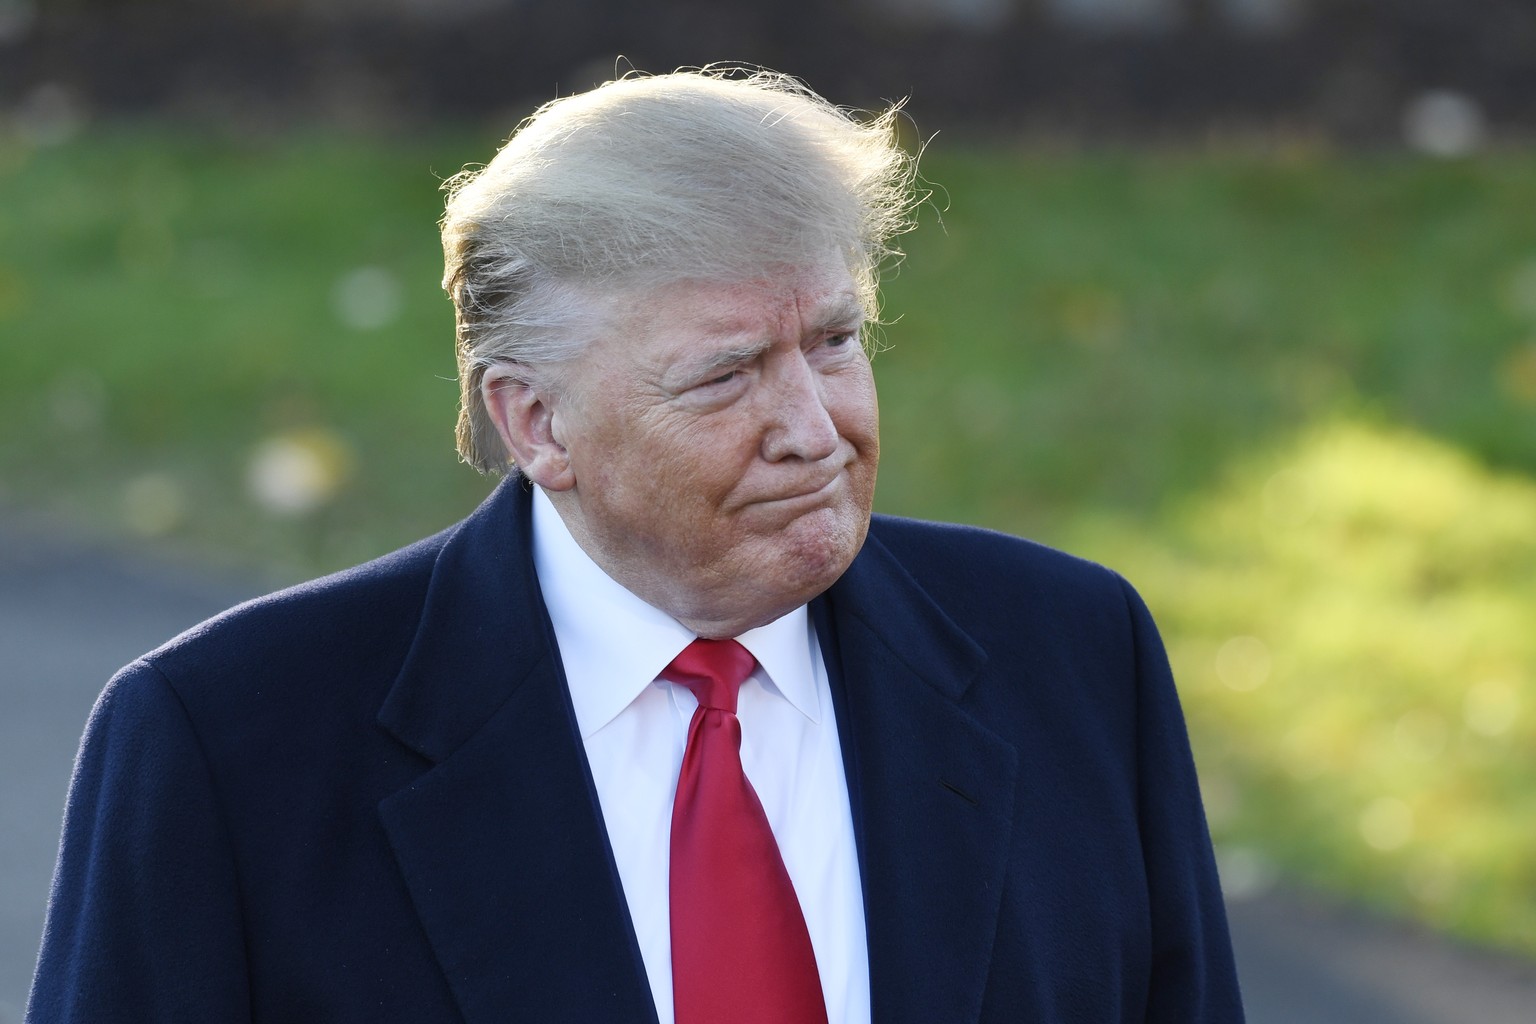 President Donald Trump talks to reporters on the South Lawn of the White House in Washington, Friday, Nov. 1, 2019. Trump is heading to Mississippi for a campaign event. (AP Photo/Susan Walsh)
Donald  ...